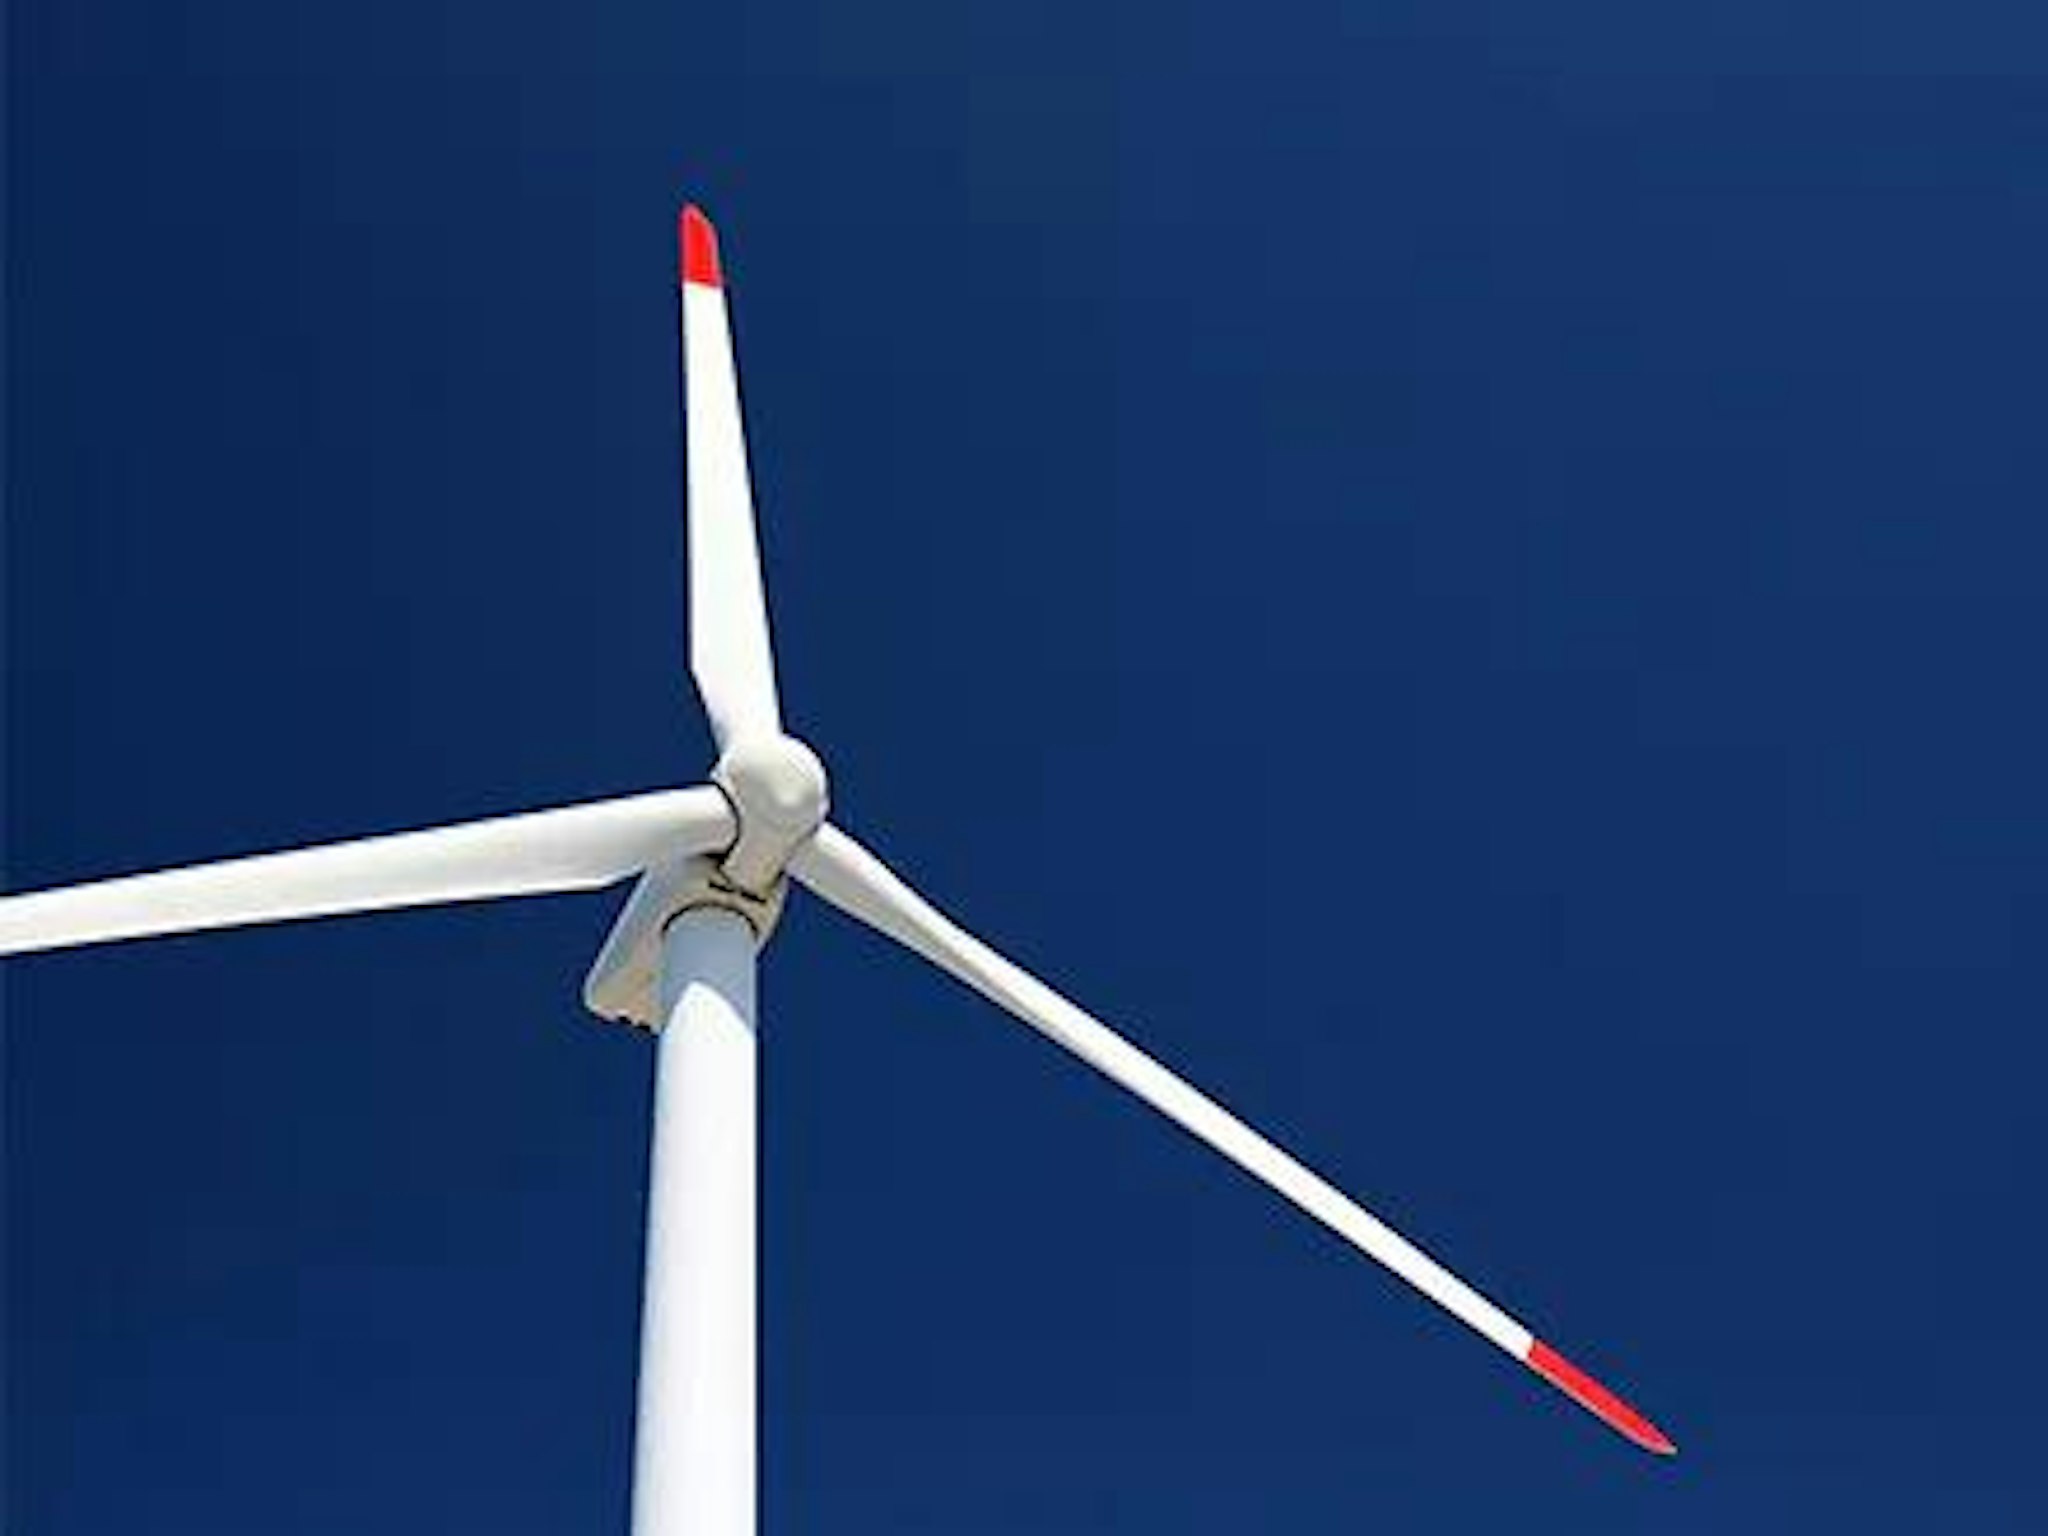 A windmill signifying how your corporate footprint relates to the impact your organization has on the environment. It is sometimes termed a company carbon footprint, environmental footprint, ecological footprint or business footprint, although there are subtle differences between them.